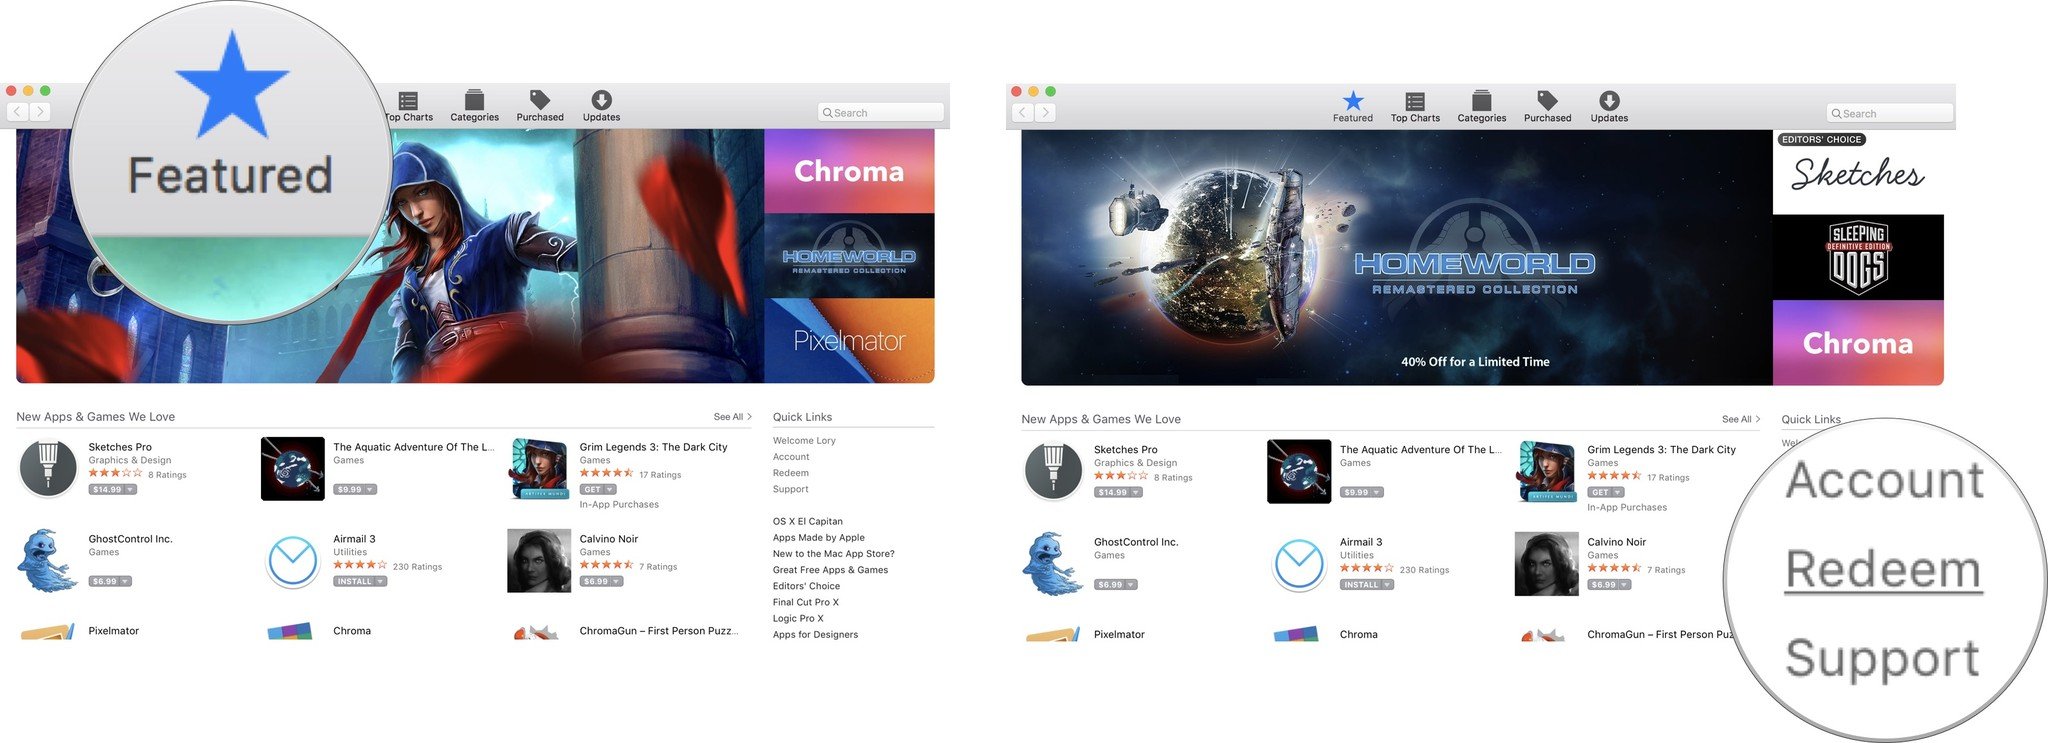 How To Redeem A Gift Card Or Promo Code In The Mac App Store Imore